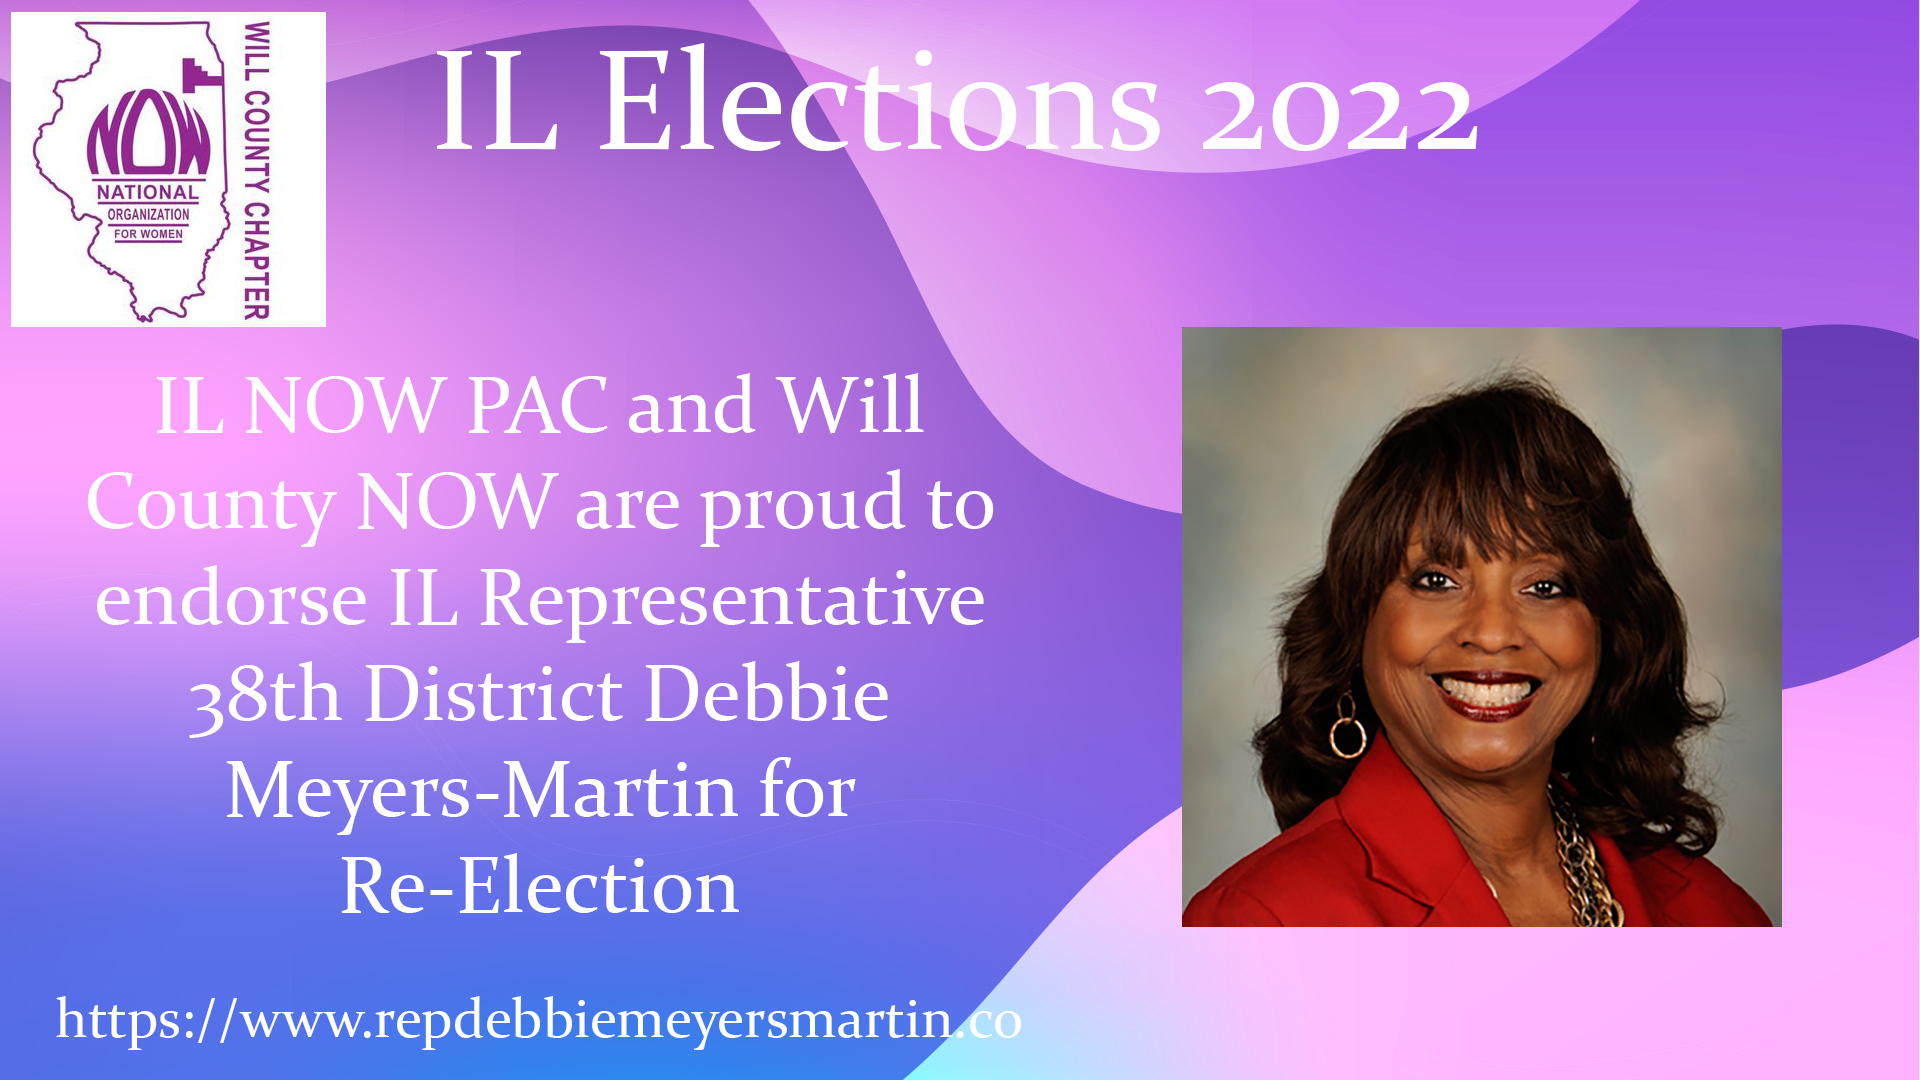 Will County NOW Endorses IL Representative 38th District Debbie Meyers-Martin for Re-Election.